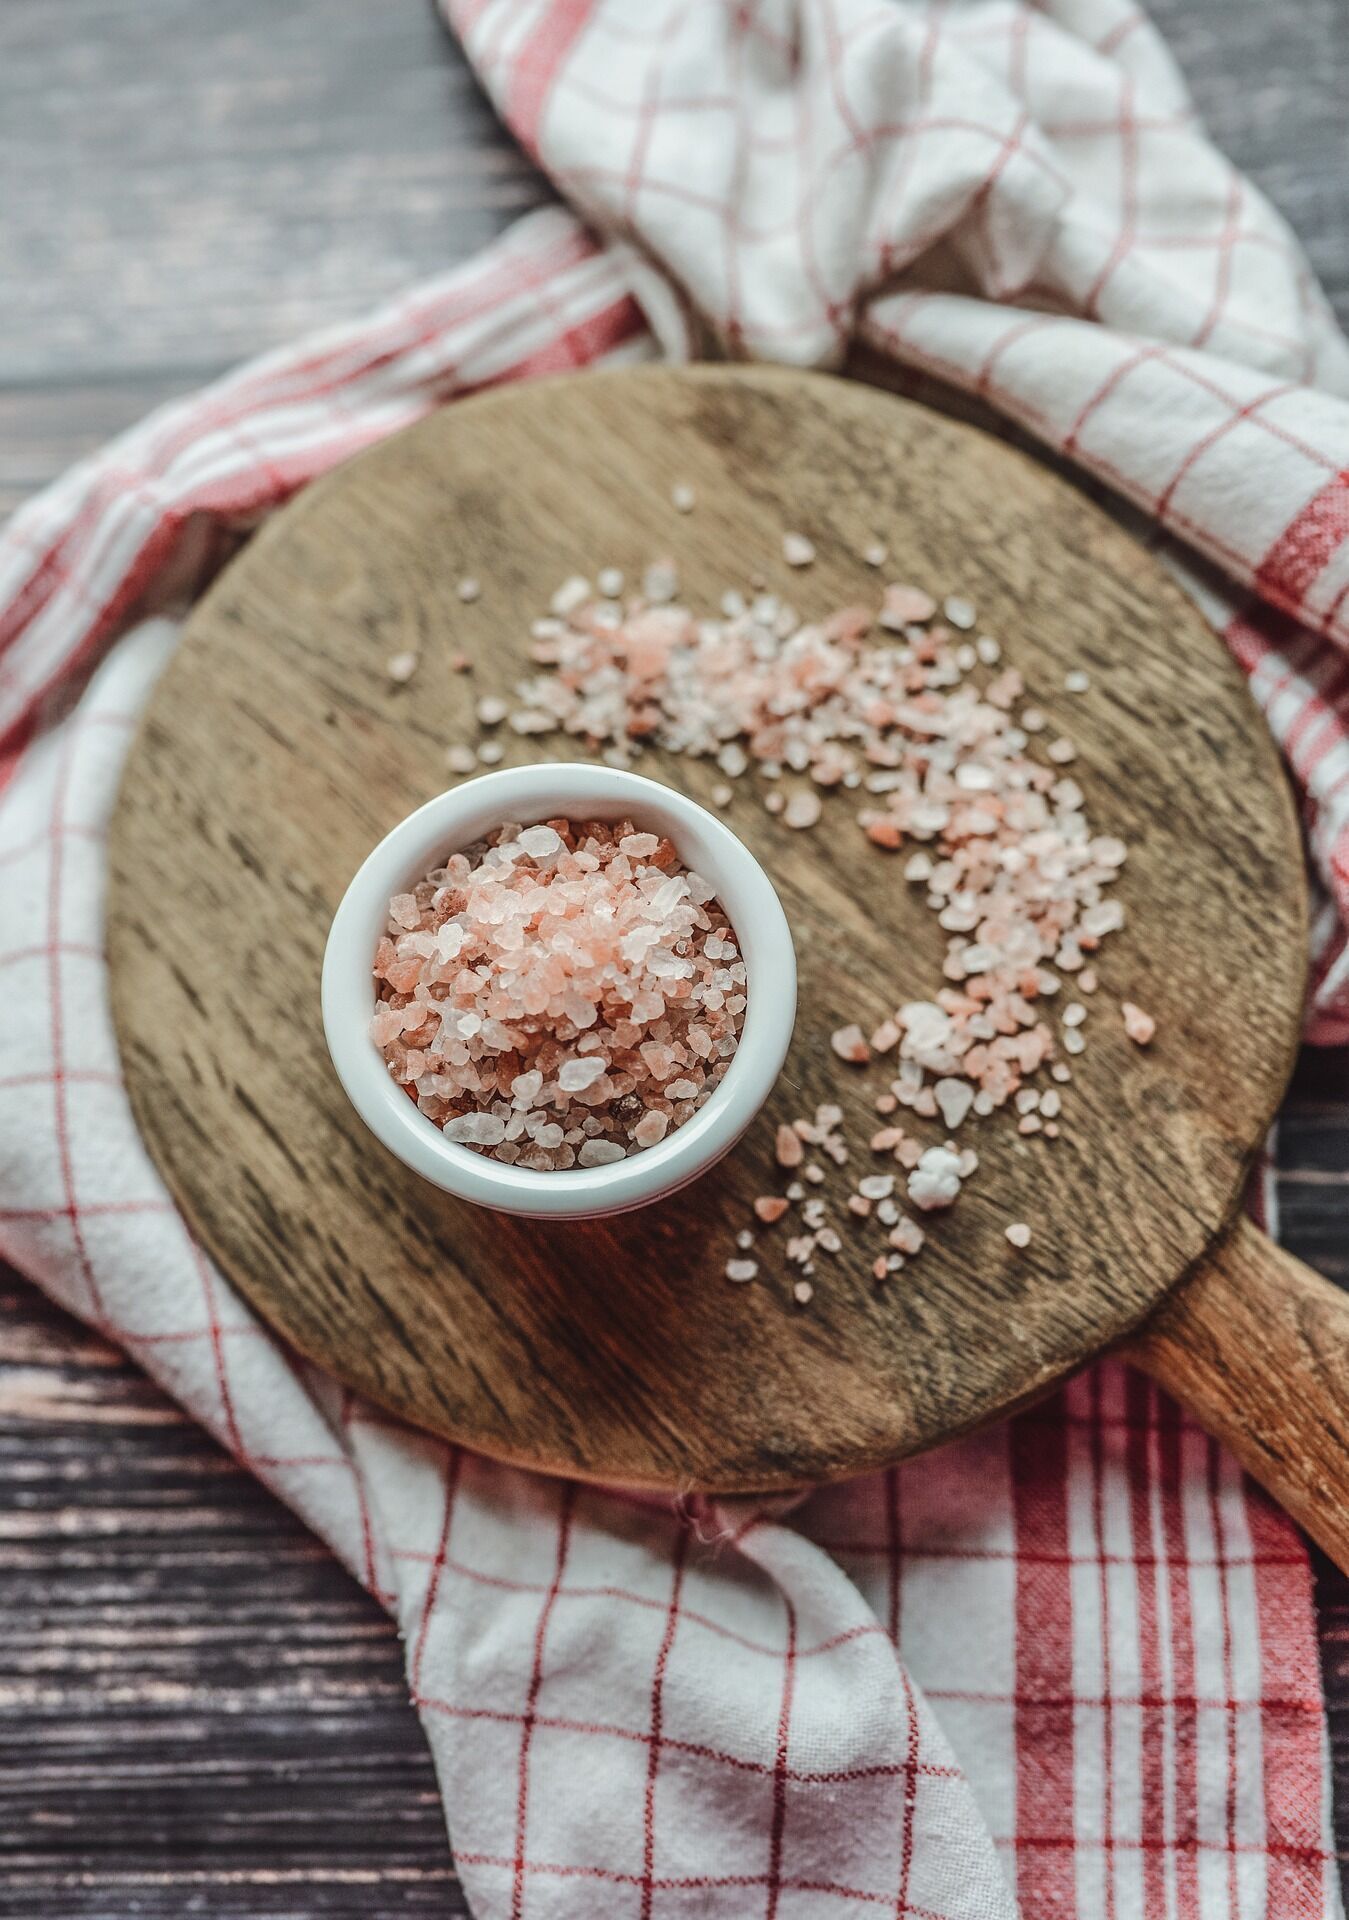 How to use pink salt correctly